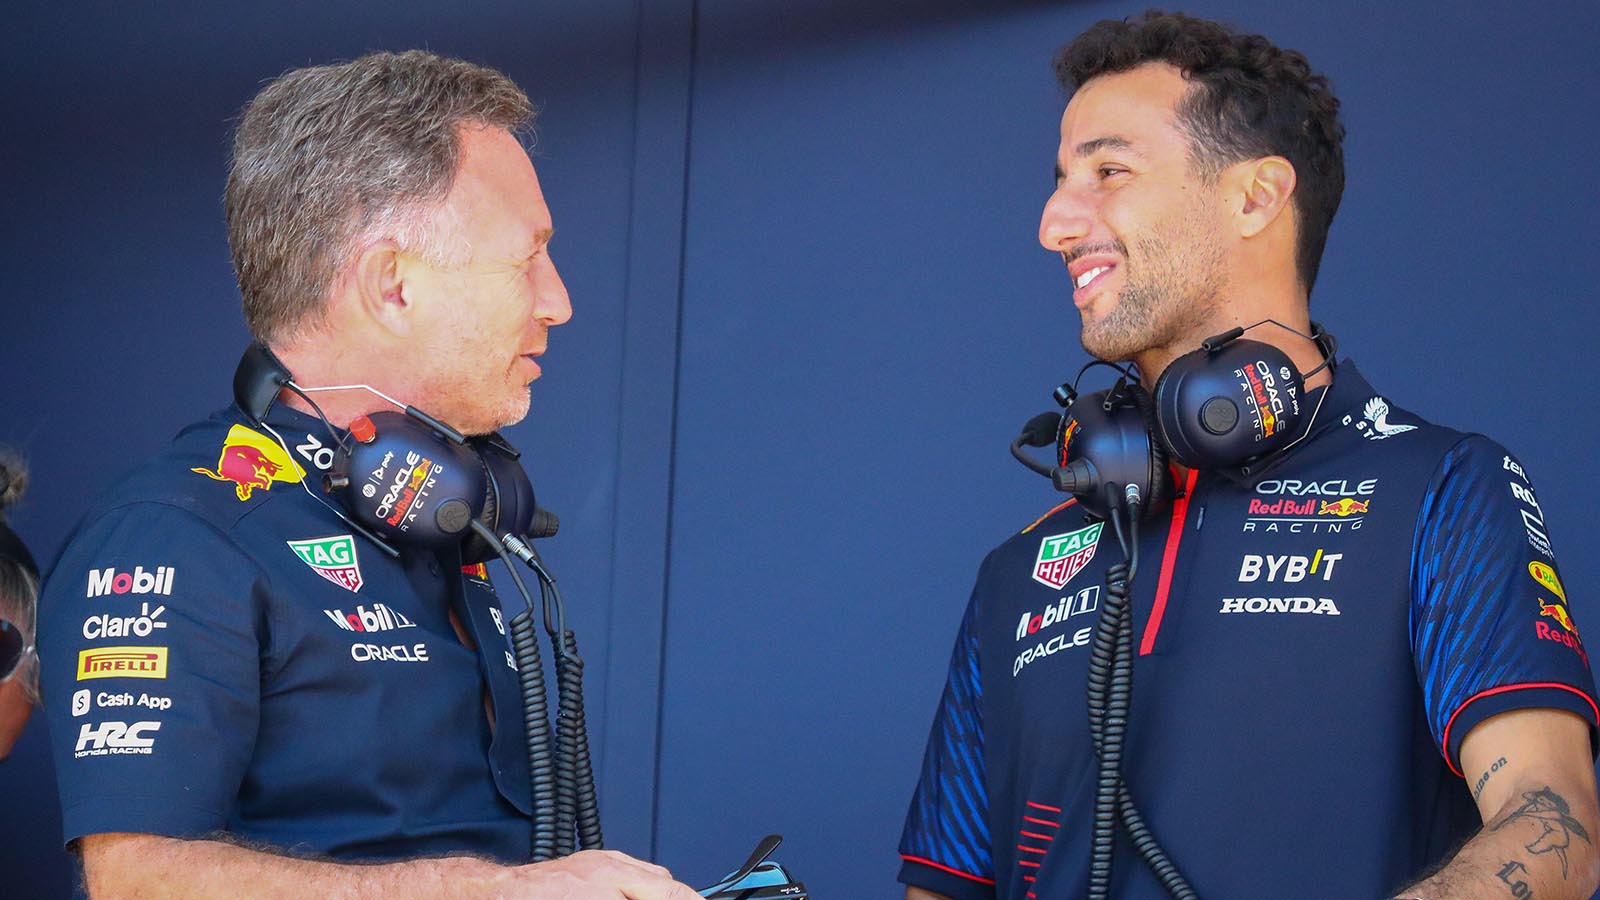 Next Red Bull driver ‘on the ladder’ emerges with Daniel Ricciardo ...